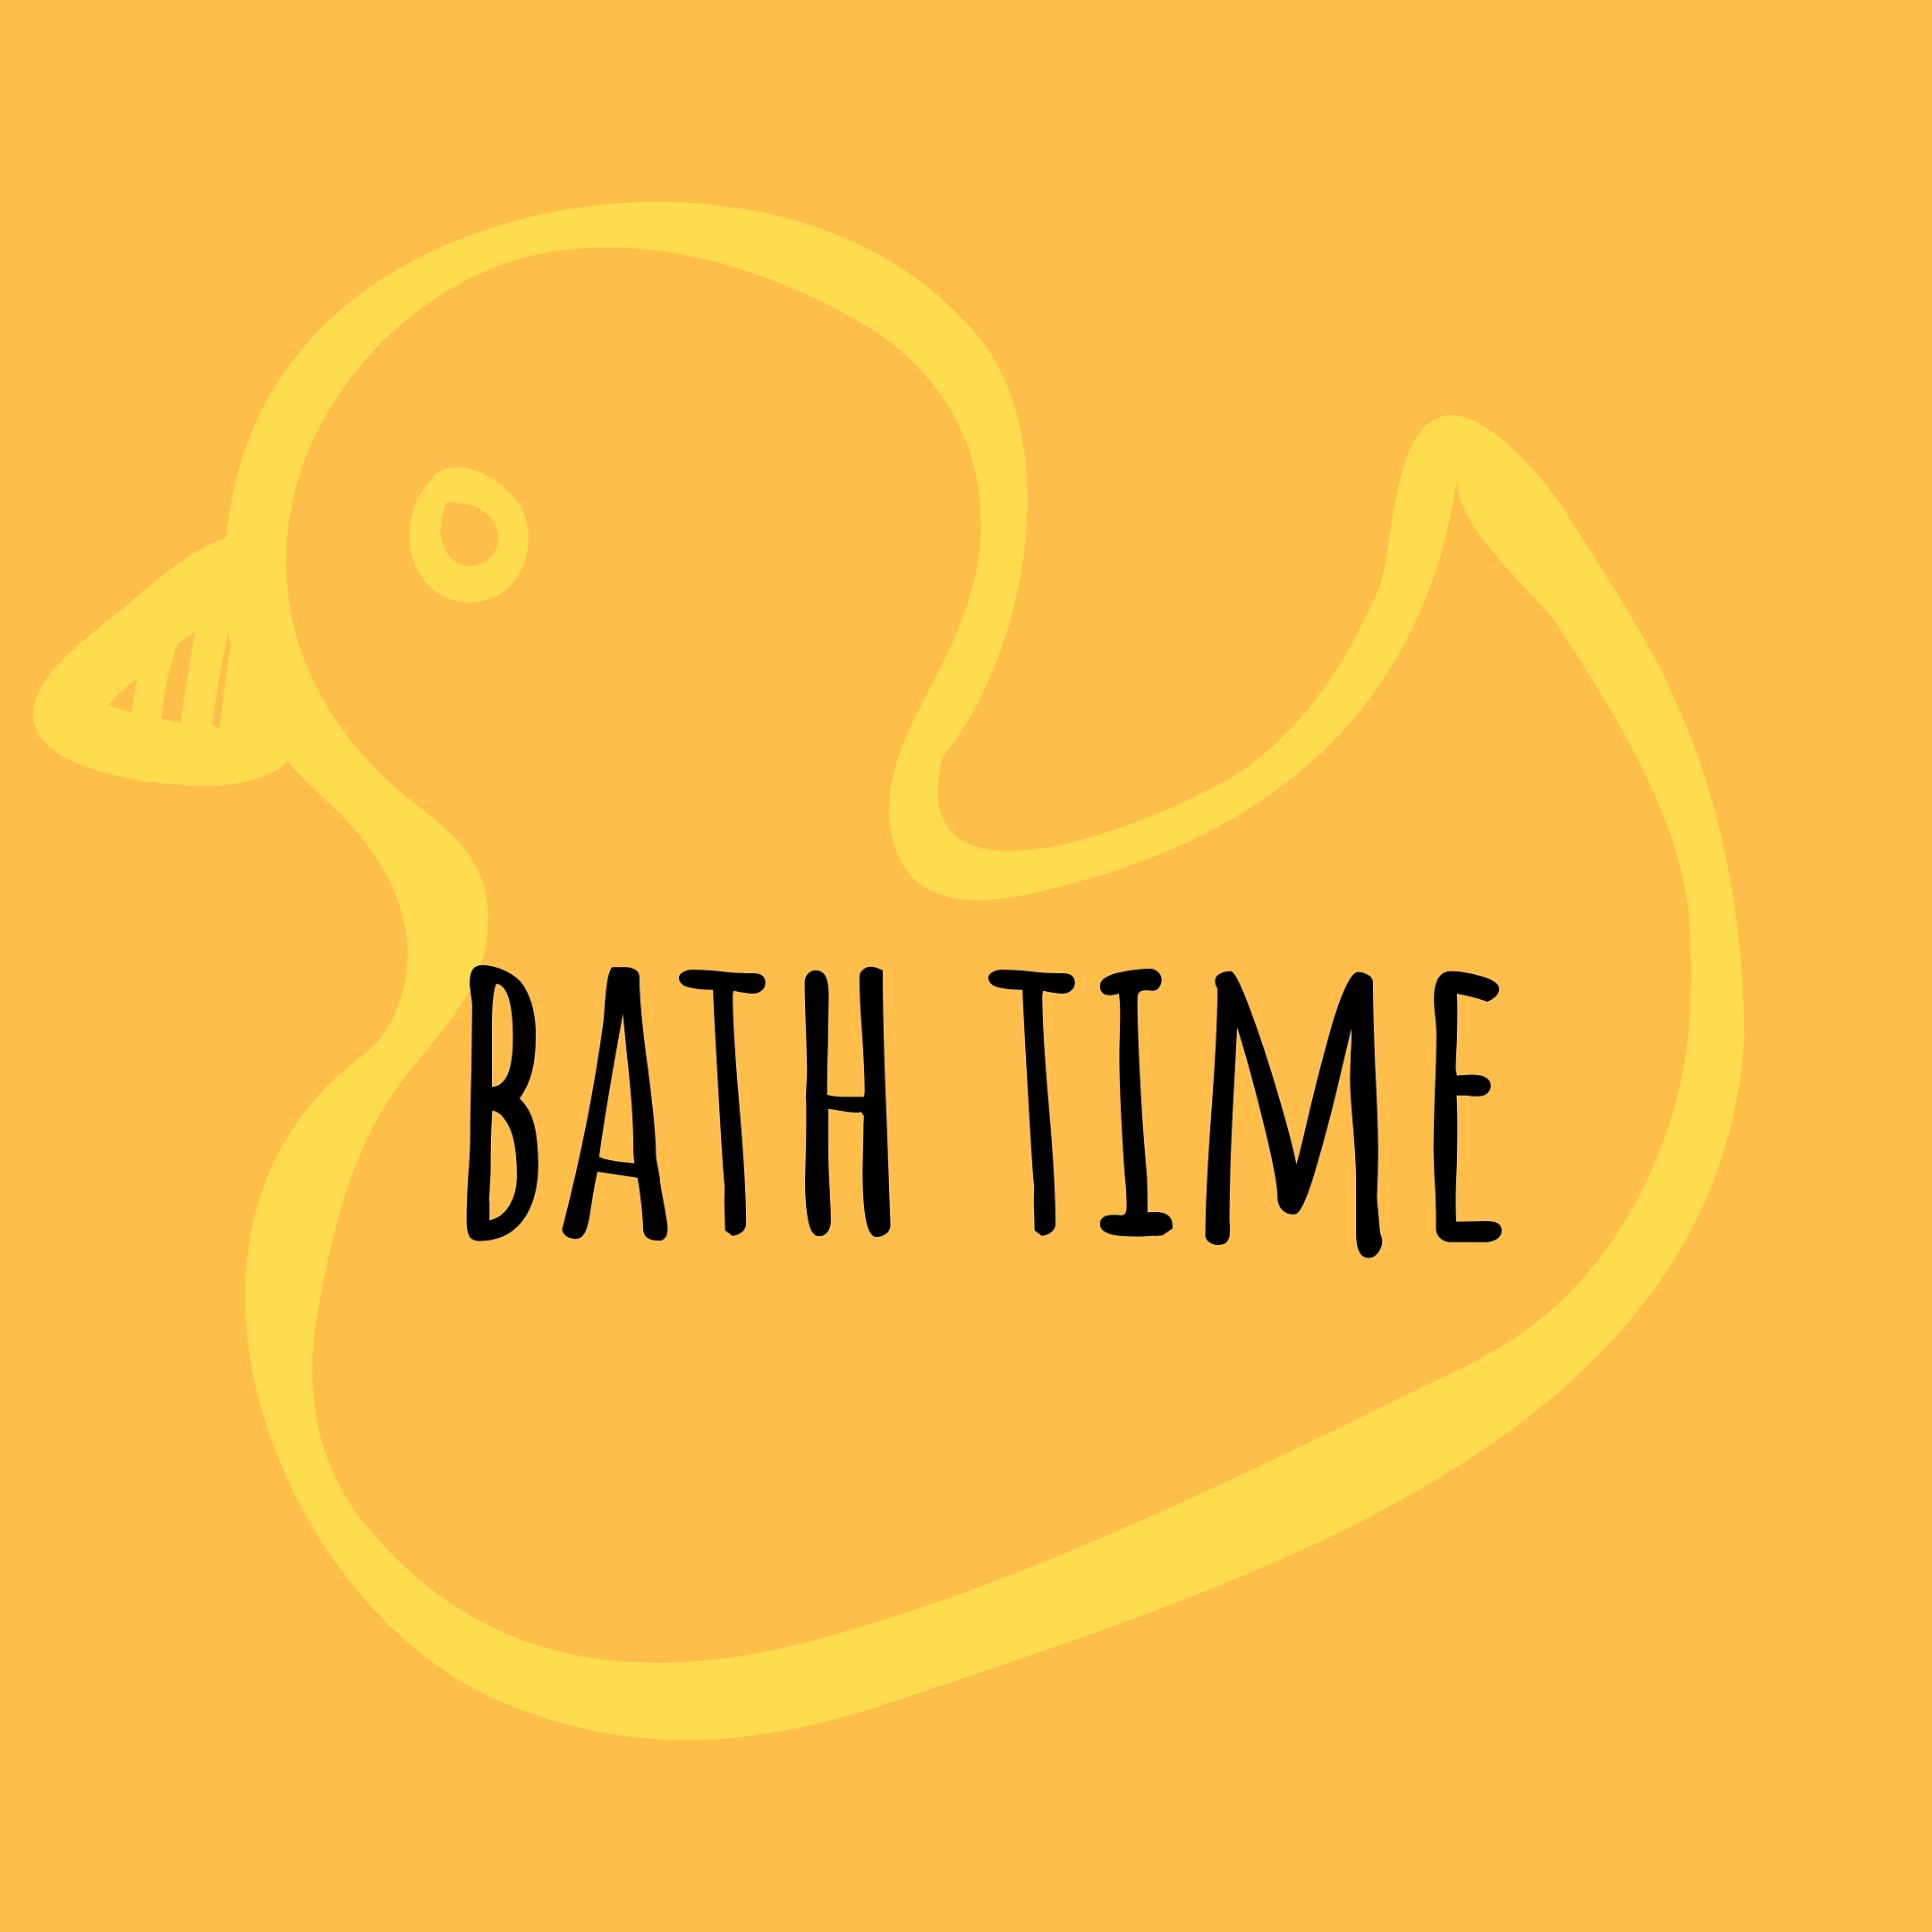 When did bath time become a battle?